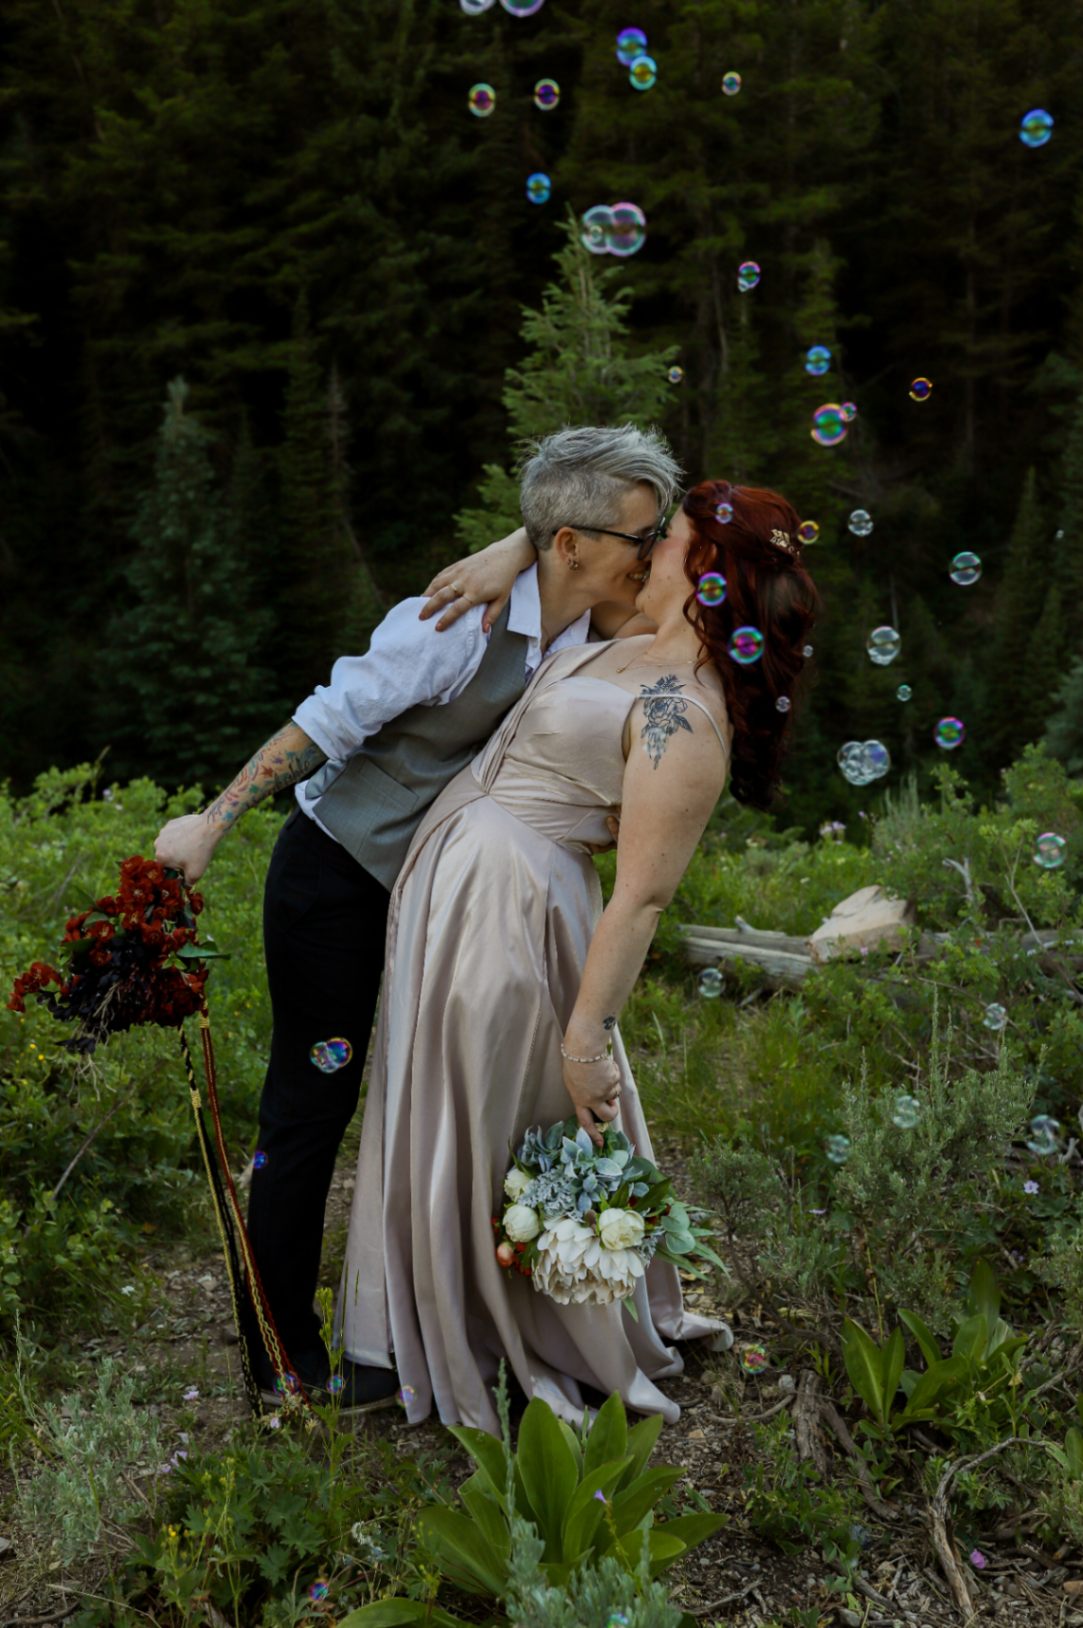 Two lesbian brides (both white, one with short gray hair, one with long dark red hair) kiss with a dip. They each have tattoos. The nonbinary bride with short gray hair is wearing a gray vest, a white shirt and dark pants, as well as glasses. The red-haired bride is wearing a light pink dress with spaghetti straps. The brides are both holding bouquets. Bubbles are floating around them.